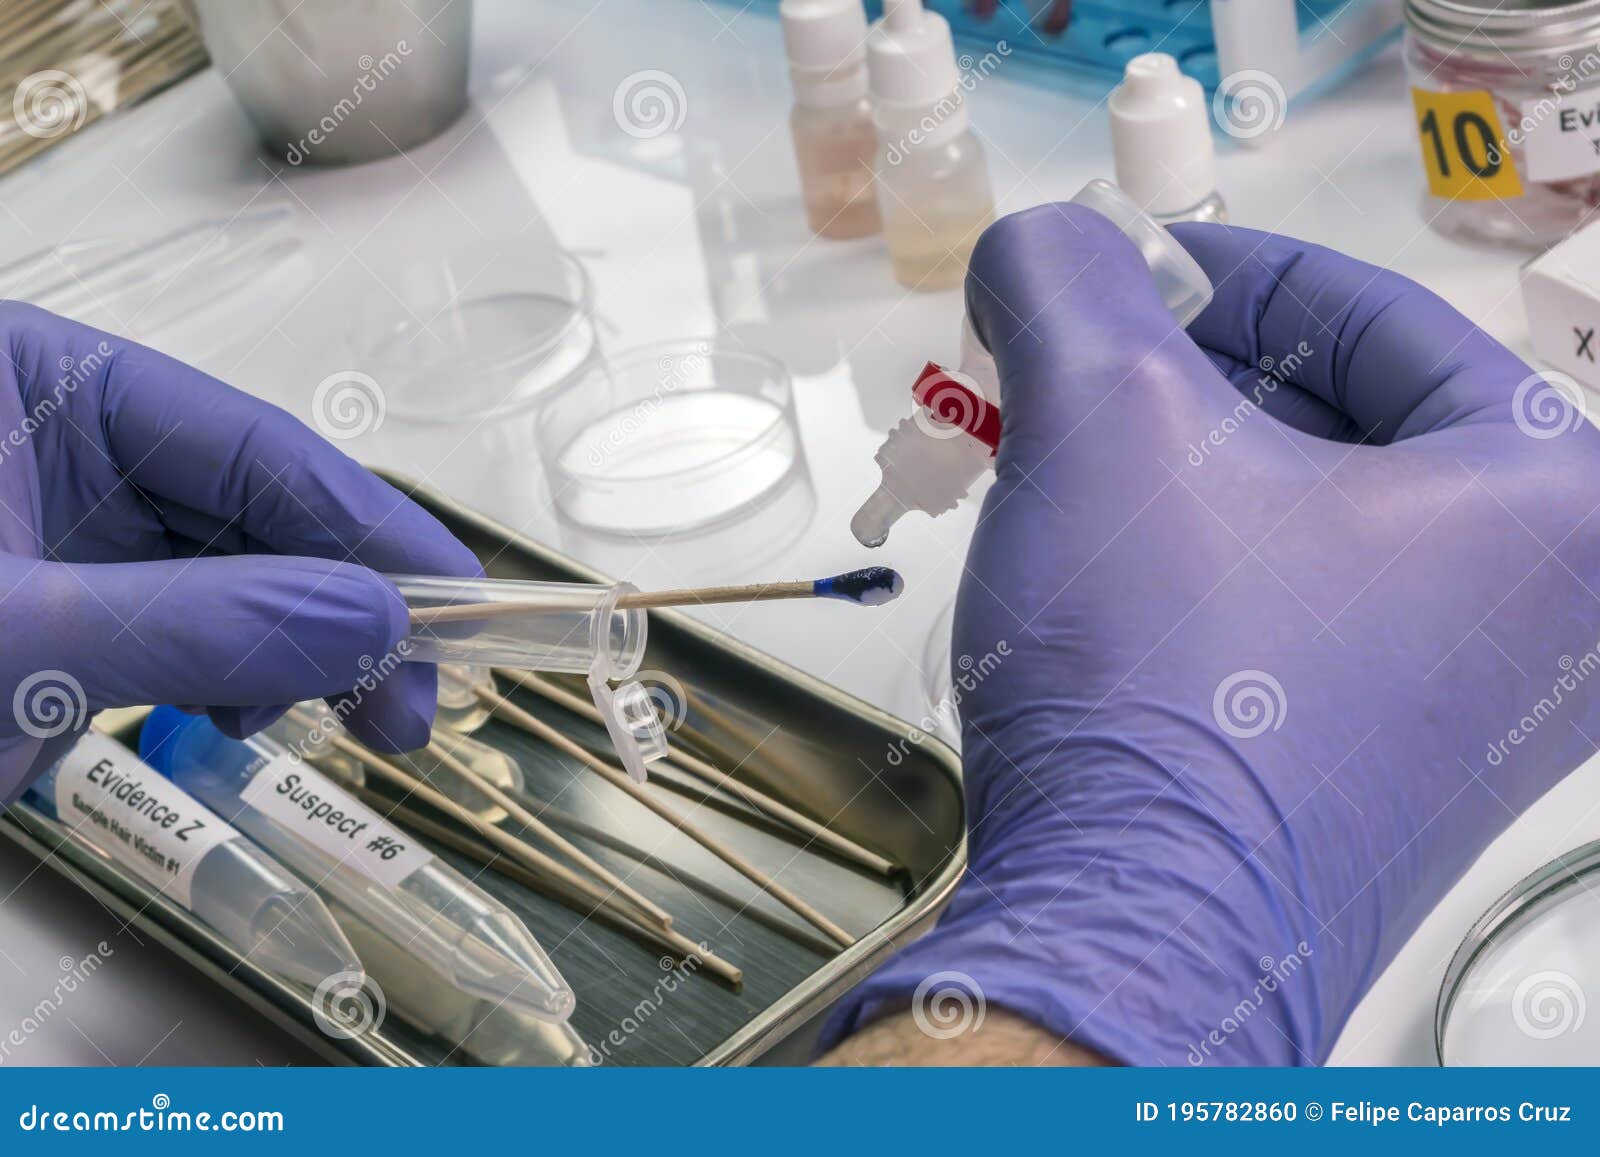 hematological analysis with forensic test kit in a murder in a crime lab, positive for human blood